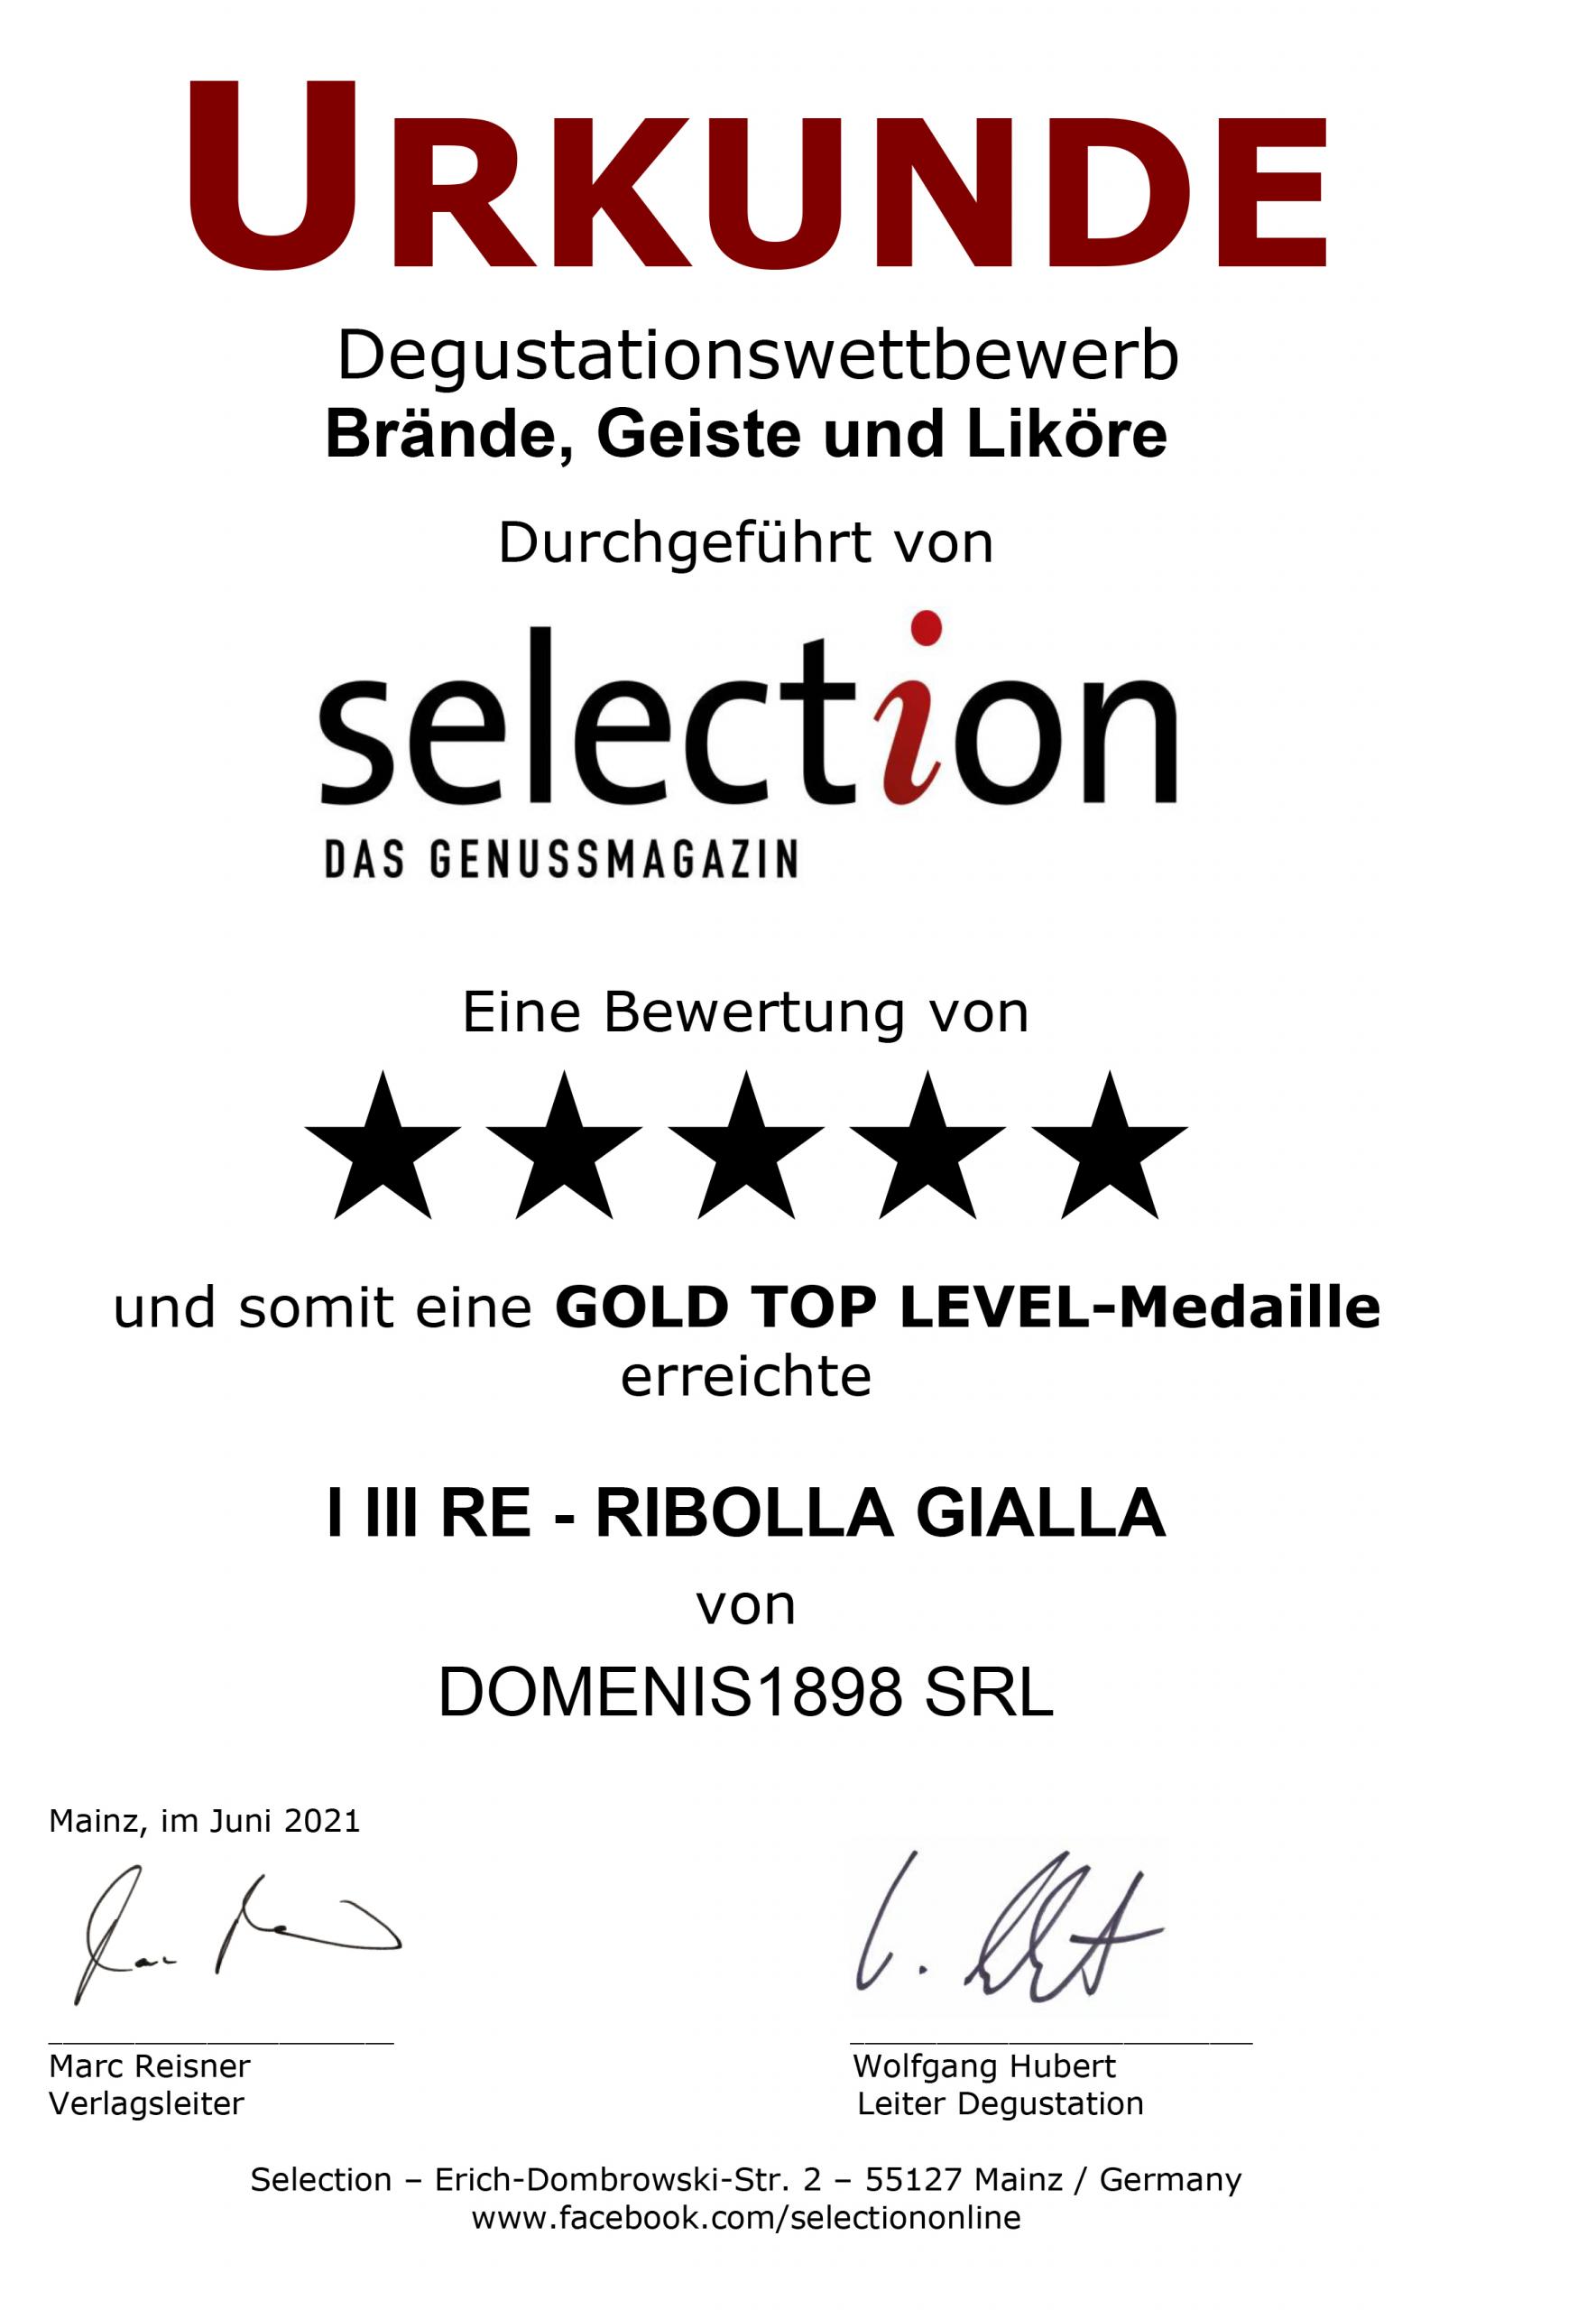 Selection aus Genussmagazin 2021 – Gold Top-Level Medal – I III Re Ribolla gialla